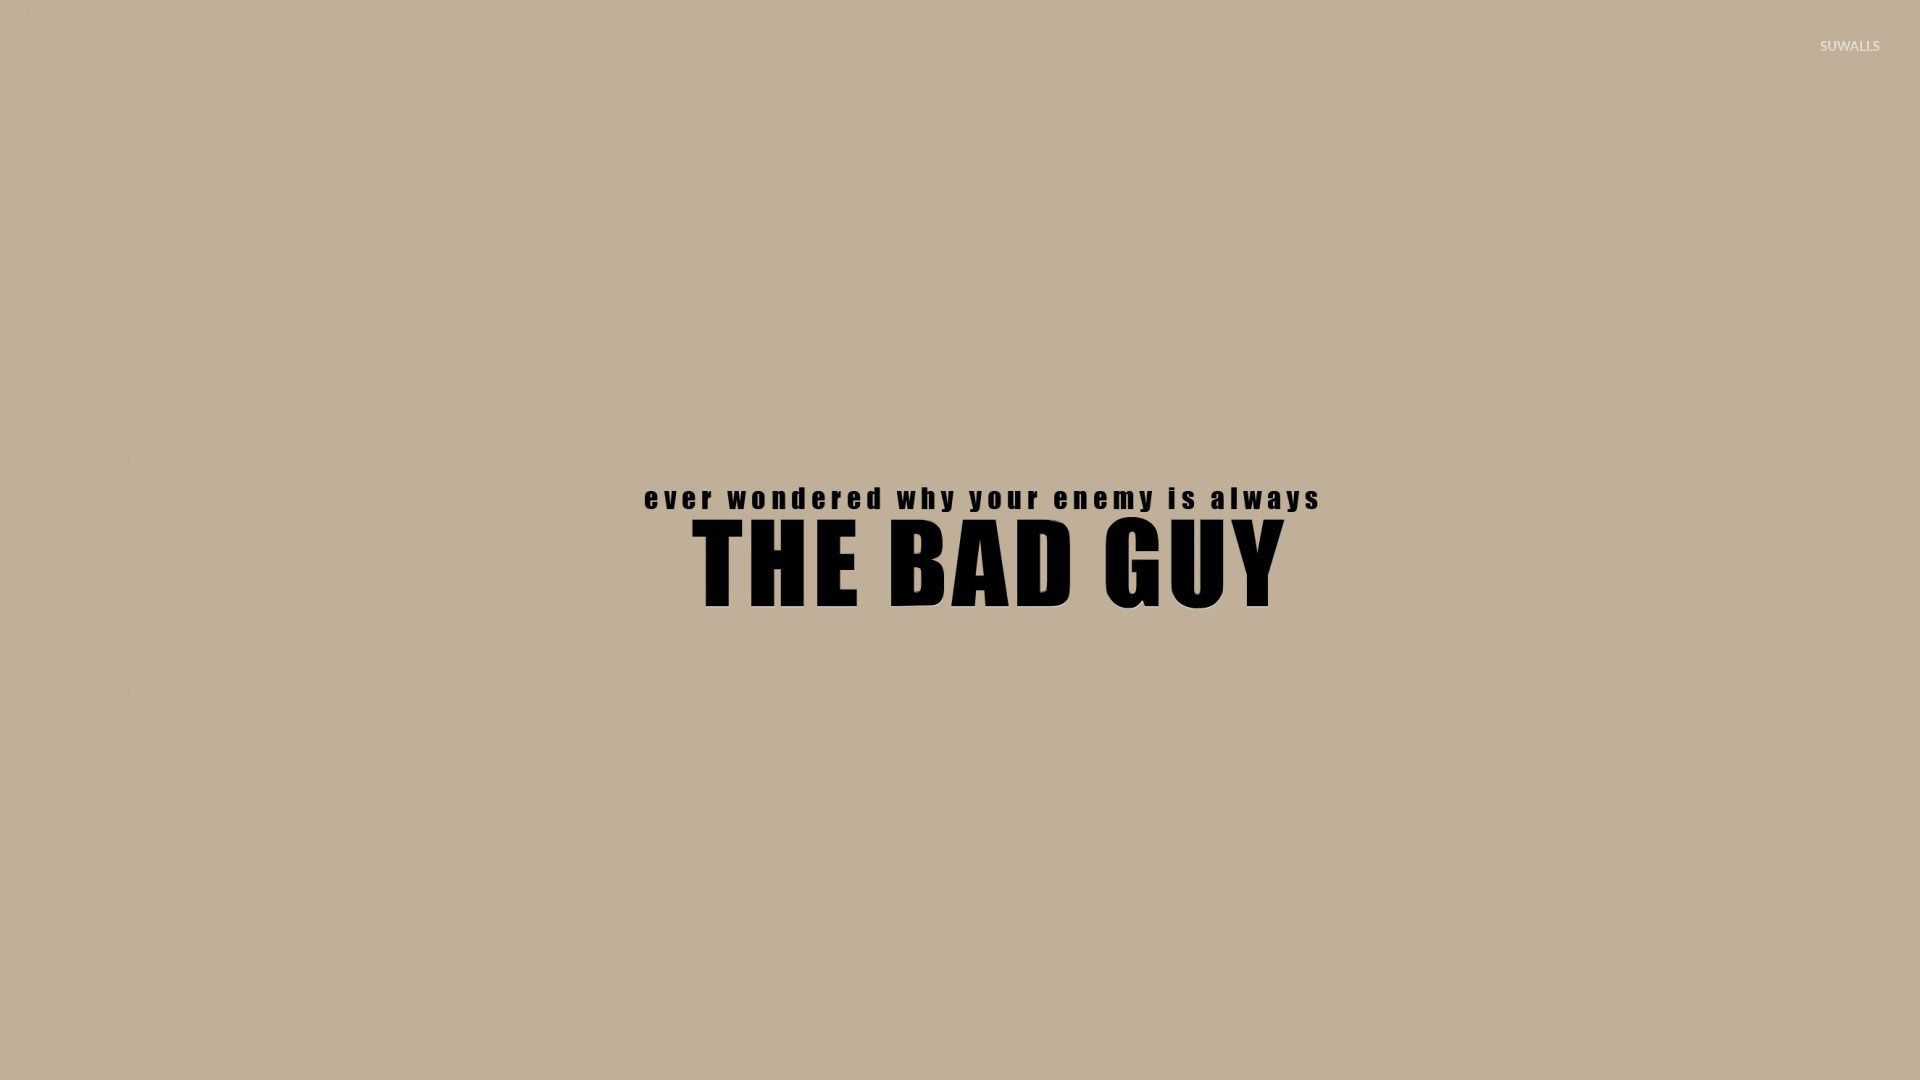 bad boy quotes and sayings